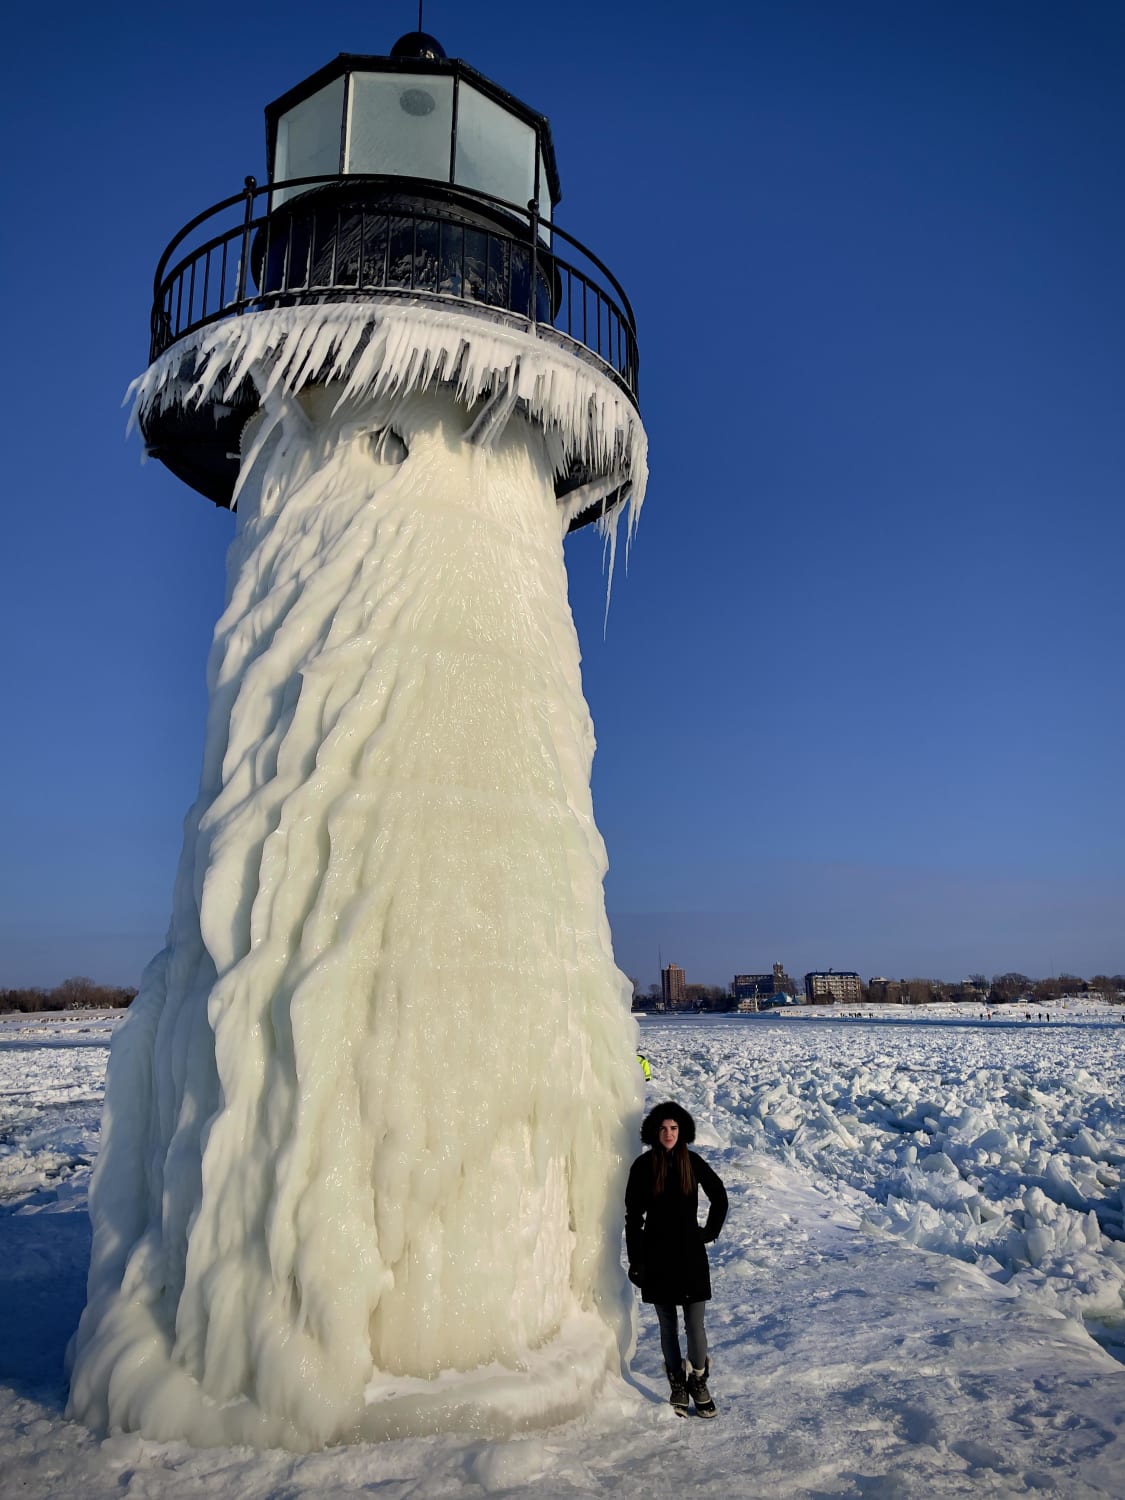 Frozen waves on a Southwest Michigan Outer Lighthouse, 2/20/21